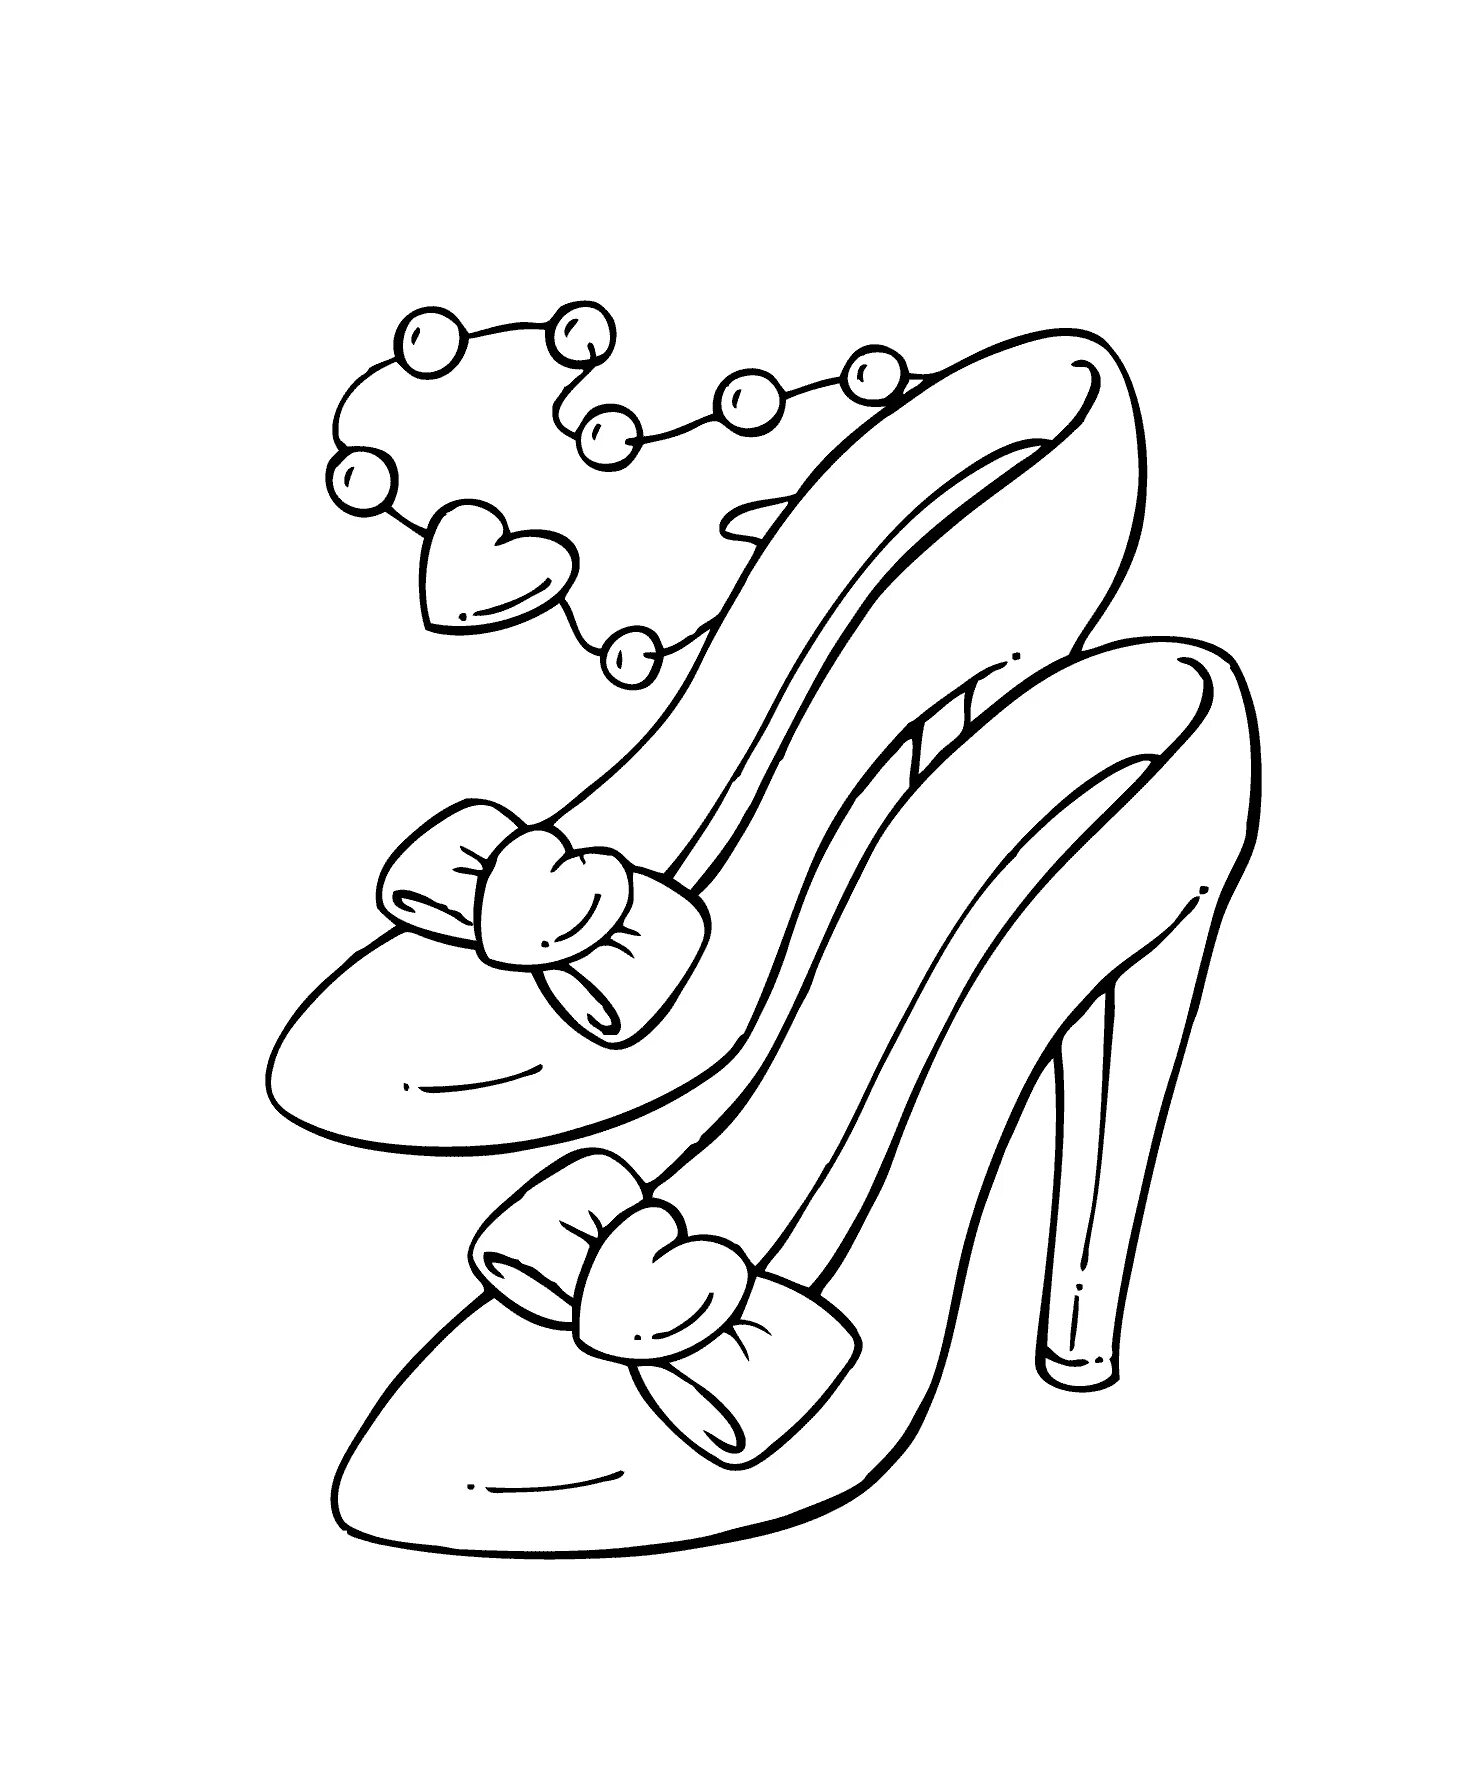 Coloring page wonderful shoes for children 4-5 years old